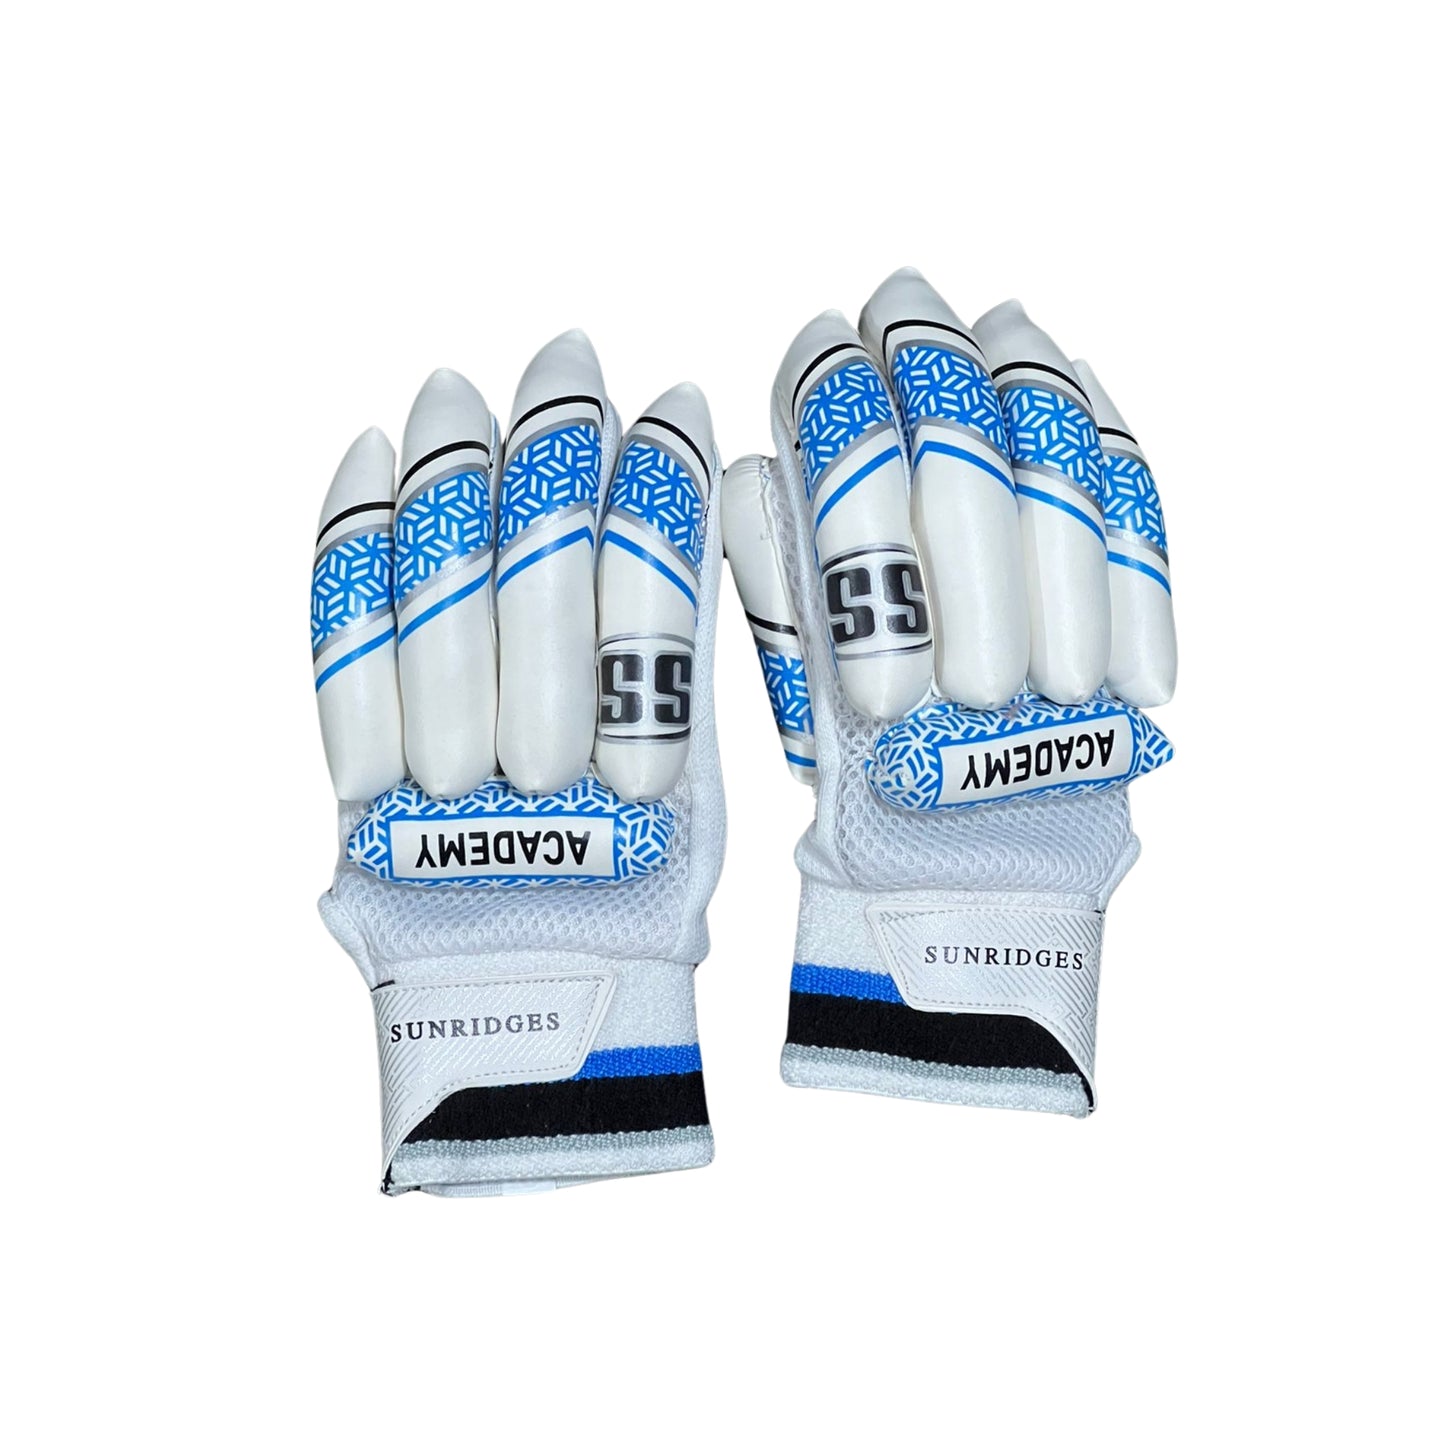 SS Academy Junior Cricket Batting Gloves for Youth / Boys